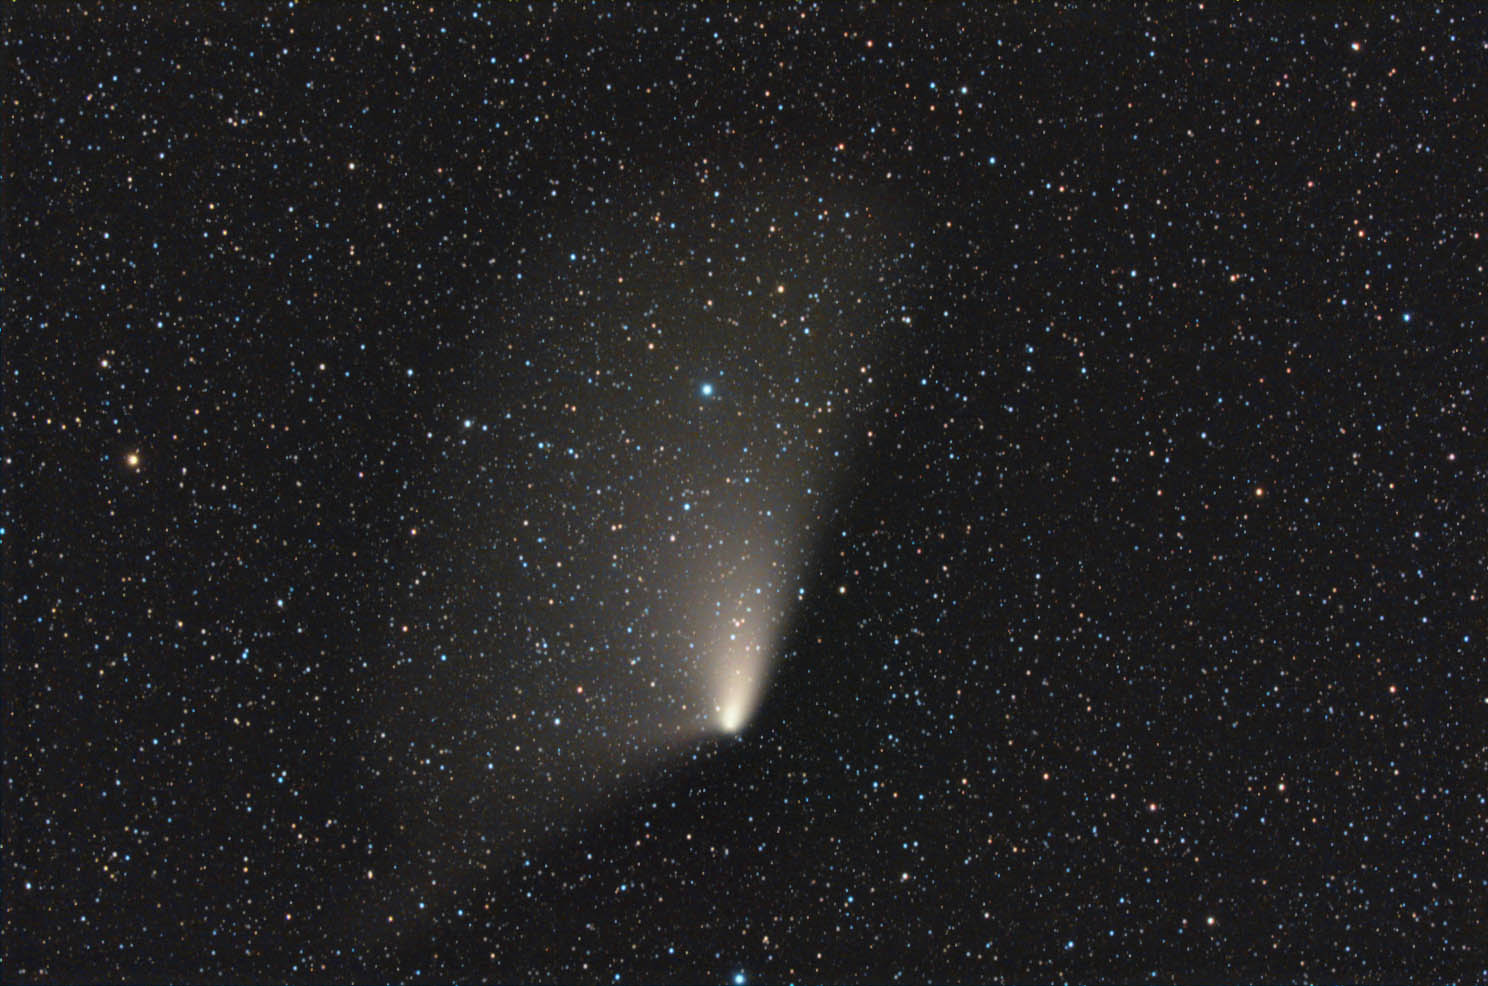 PanStarrs comet photographed in April 15 by Rolando Ligustri from Latisana: 198 KB; click on the image to enlarge at 1488x986 pixels